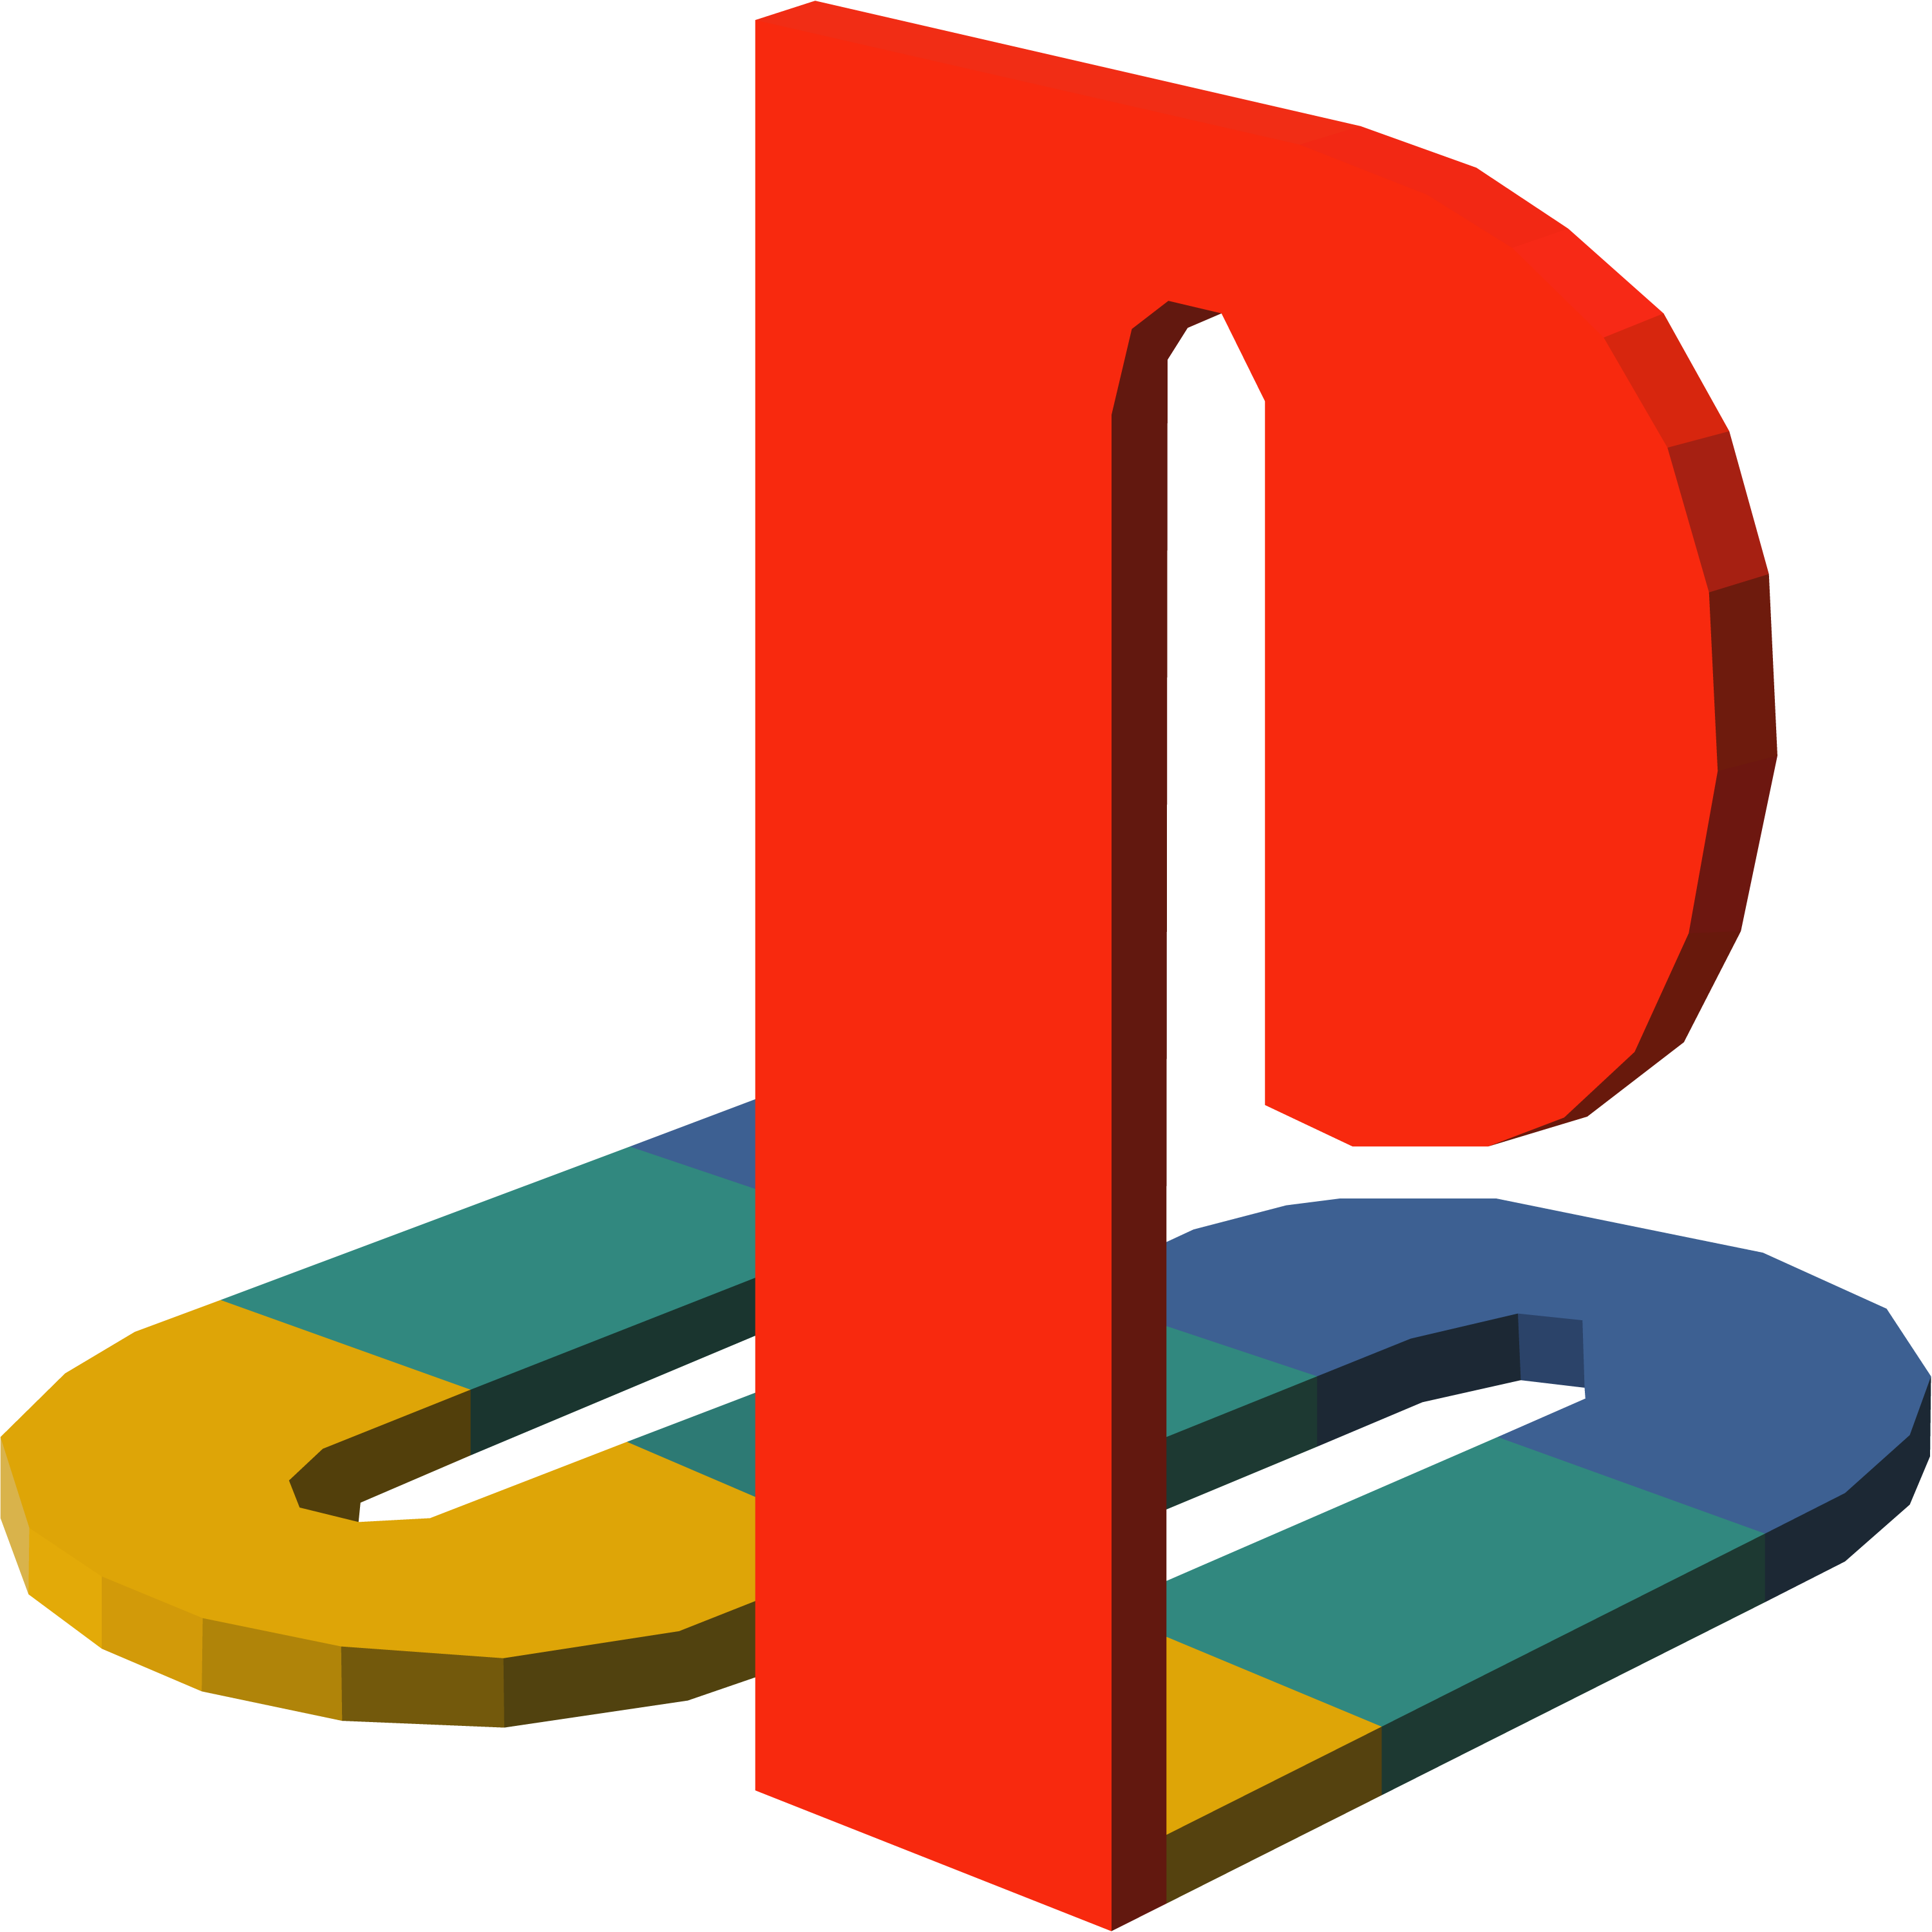 Free PlayStation 2 PNG Transparent Images, Download Free PlayStation 2